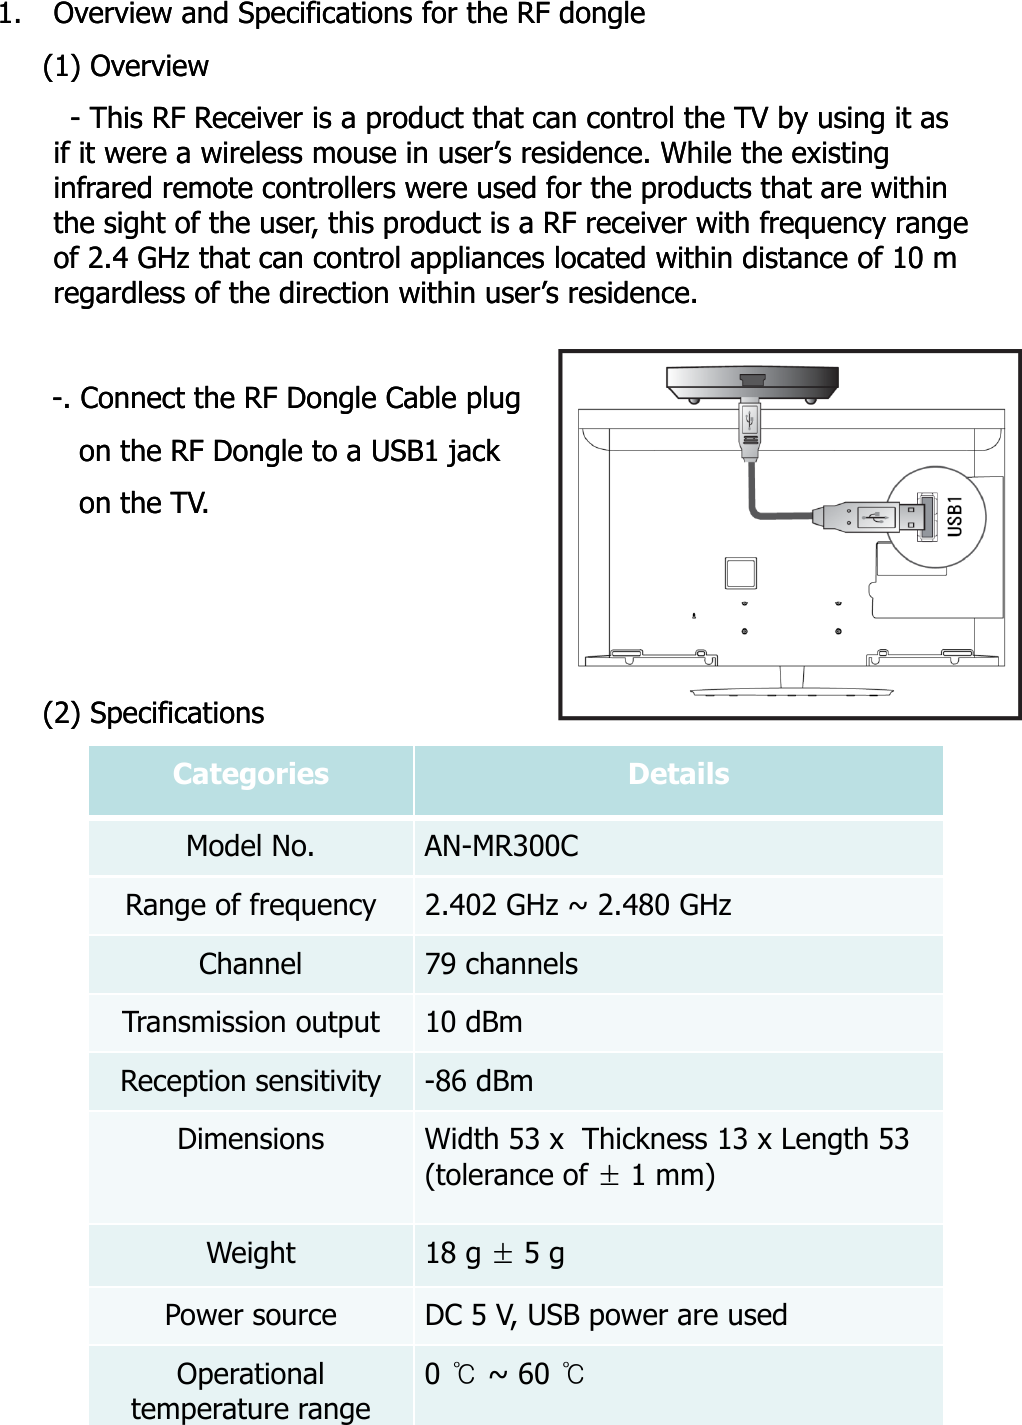 1.1. Overview and Specifications for the RF dongleOverview and Specifications for the RF dongle(1) Overview(1) Overview-- This RF Receiver is a product that can control the TV by using it as This RF Receiver is a product that can control the TV by using it as if it were a wireless mouse in user’s residence. While the existing  if it were a wireless mouse in user’s residence. While the existing  infrared remote controllers were used for the products that are within infrared remote controllers were used for the products that are within the sight of the user, this product is a RF receiver with frequency range the sight of the user, this product is a RF receiver with frequency range of 2.4 GHz that can control appliances located within distance of 10 m of 2.4 GHz that can control appliances located within distance of 10 m regardless of the direction within user’s residence. regardless of the direction within user’s residence. CtthRFDlCbllCtthRFDlCbll--. Connect the RF Dongle Cable plug . Connect the RF Dongle Cable plug on the RF Dongle to a USB1 jackon the RF Dongle to a USB1 jackon the TV.on the TV.(2) Specifications(2) SpecificationsCategories DetailsModel No. AN-MR300CRange of frequency 2.402 GHz ~ 2.480 GHzChannel 79 channelsTransmission output10dBmTransmission output10 dBmReception sensitivity -86 dBmDimensions Width 53 x Thickness 13 x Length 53 (tolerance of ±1 mm) Wiht18±5Weight18 g ±5 g Power source DC 5 V, USB power are usedOperational temperature range 0 ℃~ 60 ℃